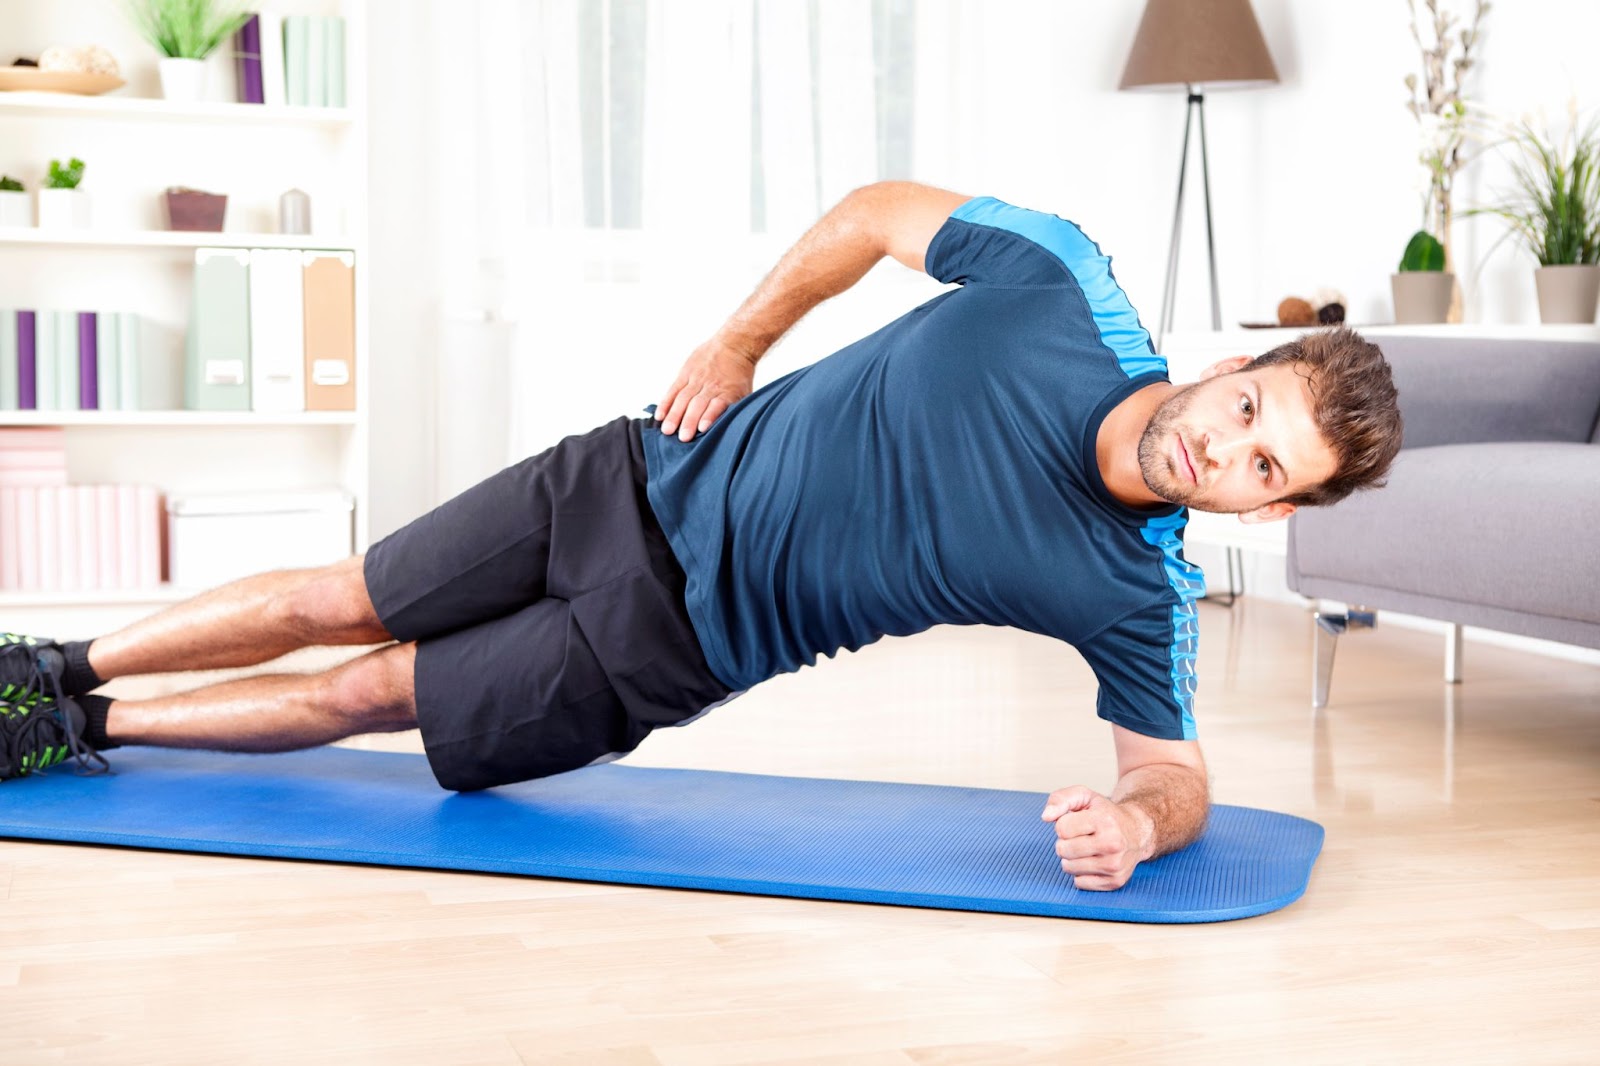 Man in blue performing a side plank at home